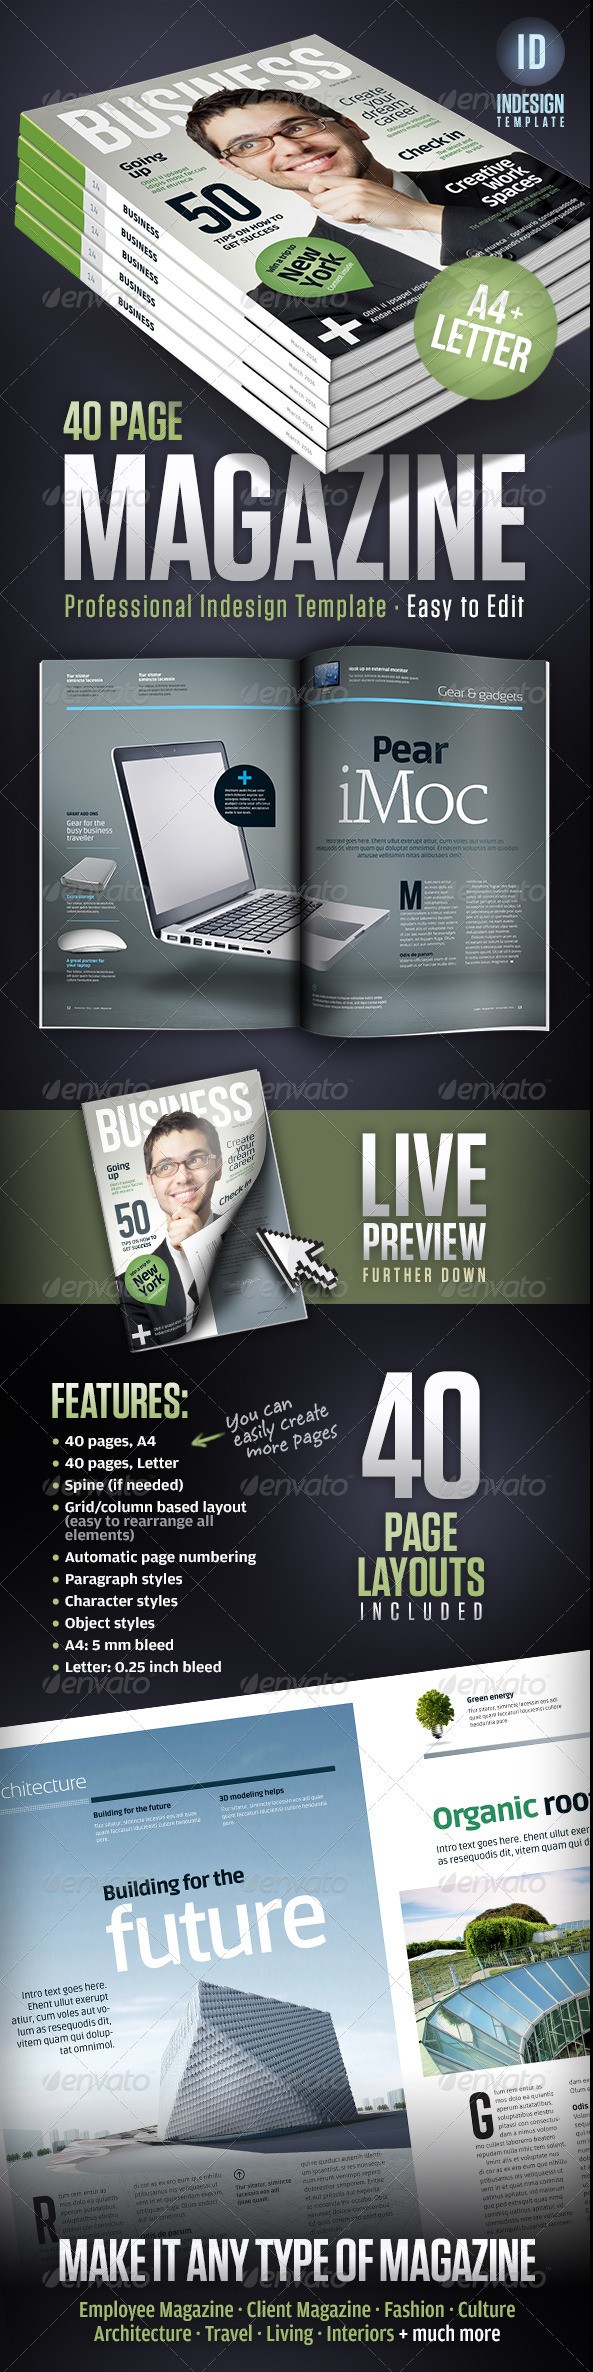 Business Magazine Template A4 + Letter - 40 pages